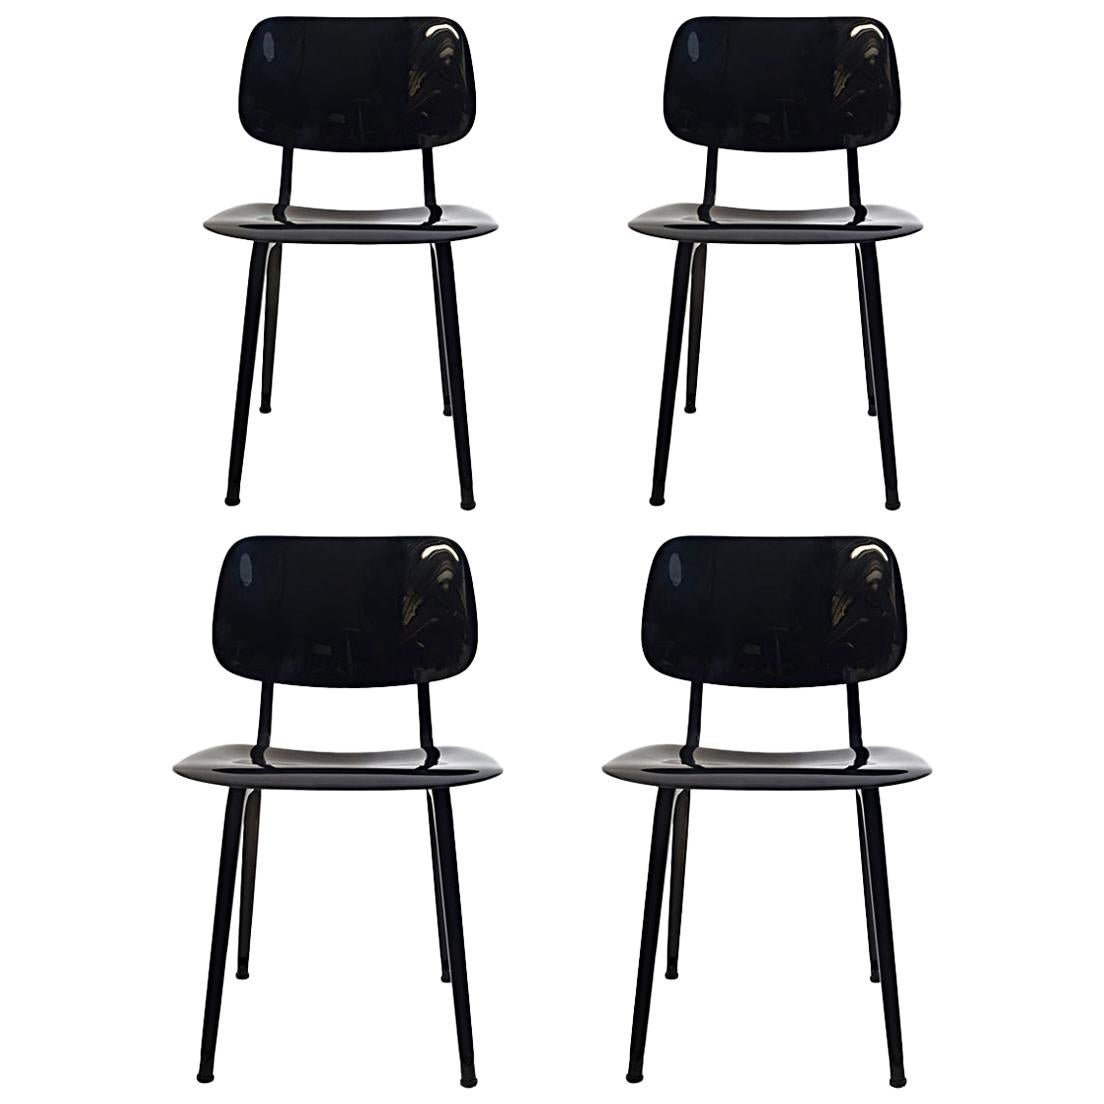 Set of 4 Mid-Century Modern Chairs "Revolt" by Friso Kramer for Ahrend